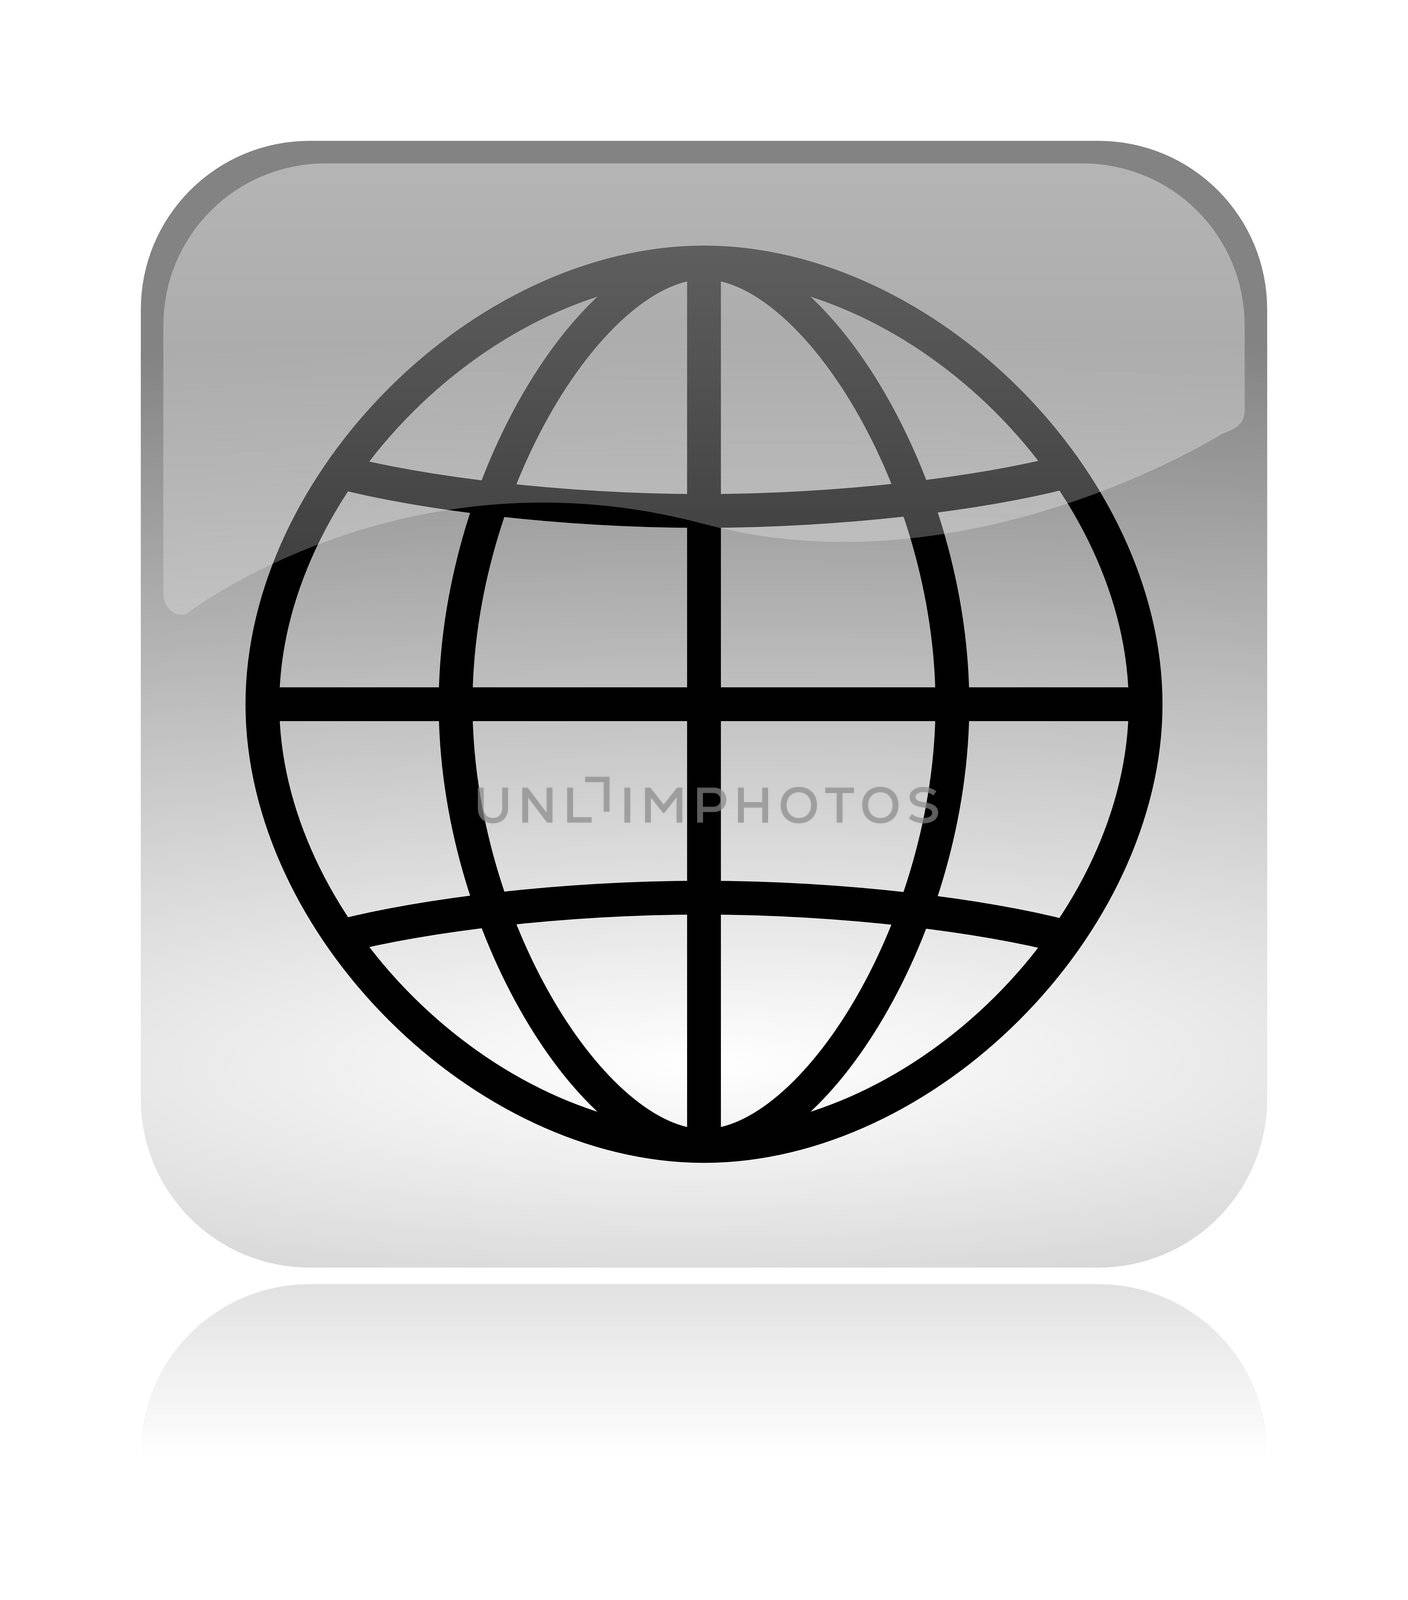 World meridians parallel web interface icon by make